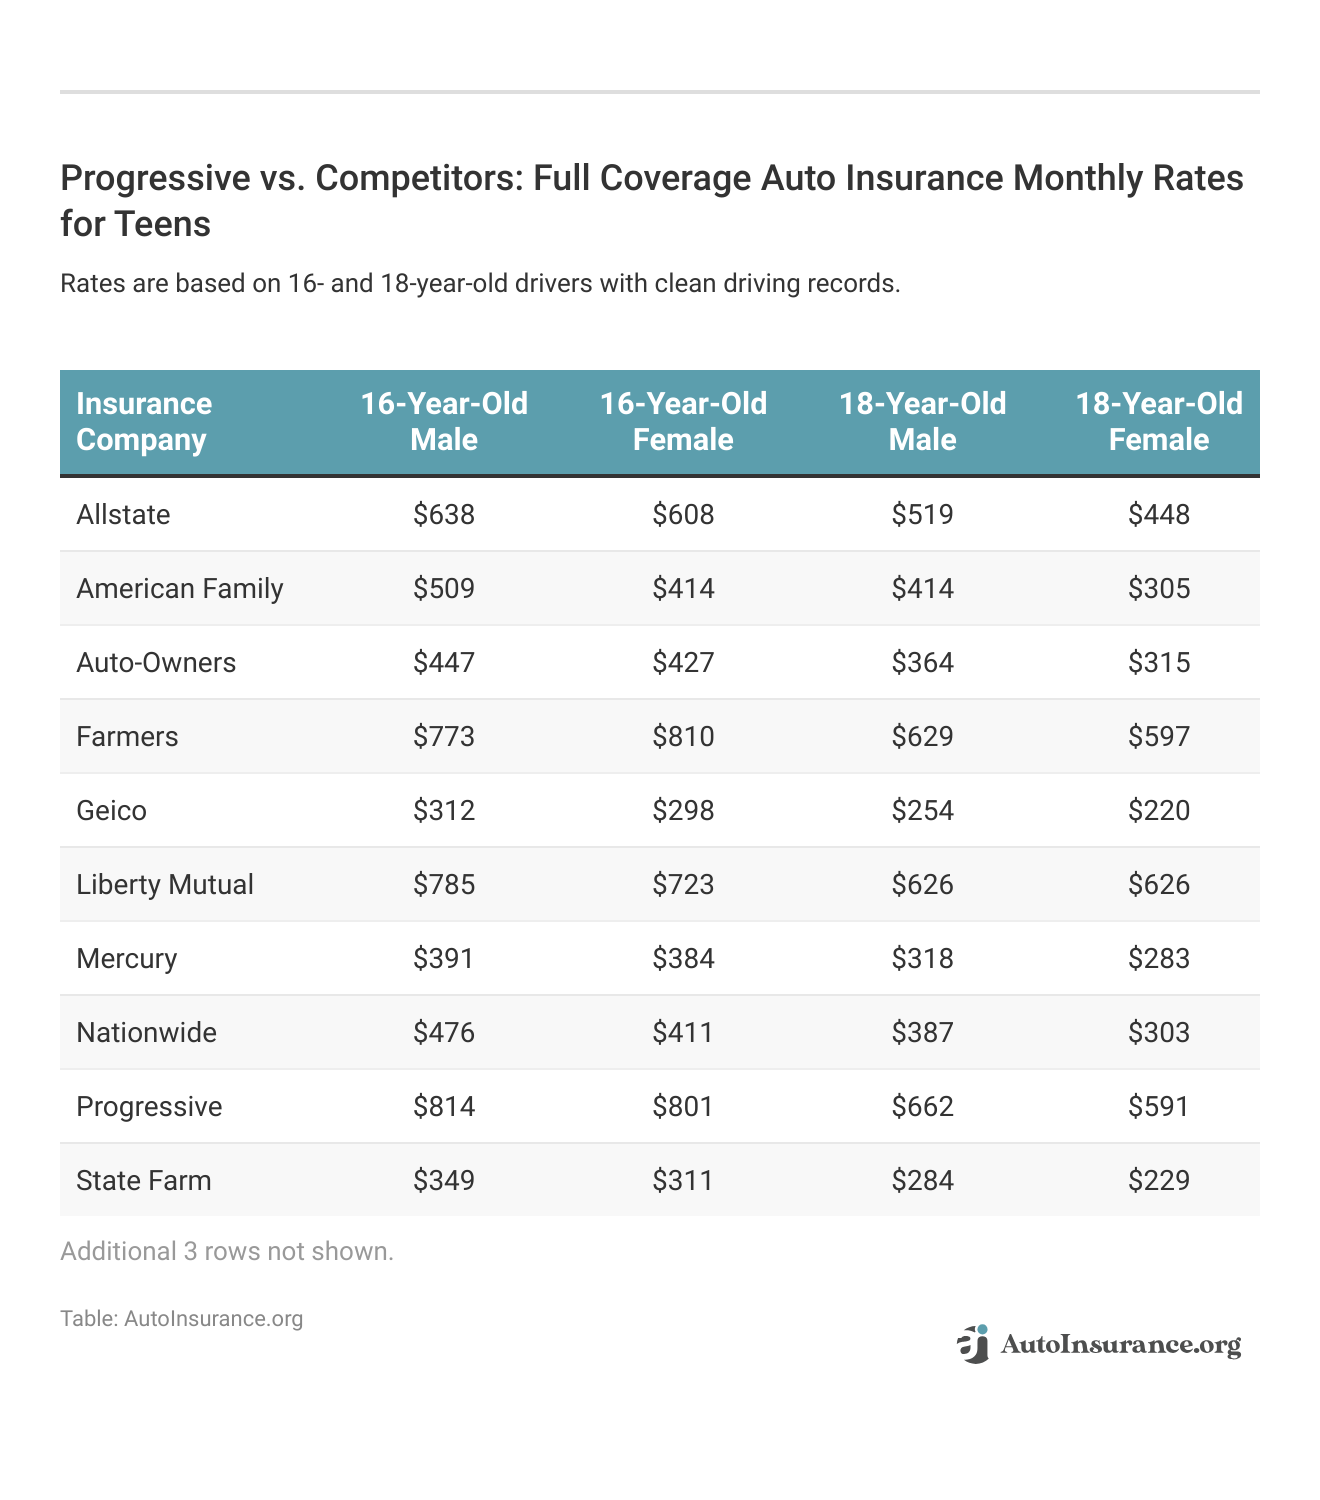 <h3>Progressive vs. Competitors: Full Coverage Auto Insurance Monthly Rates for Teens</h3>